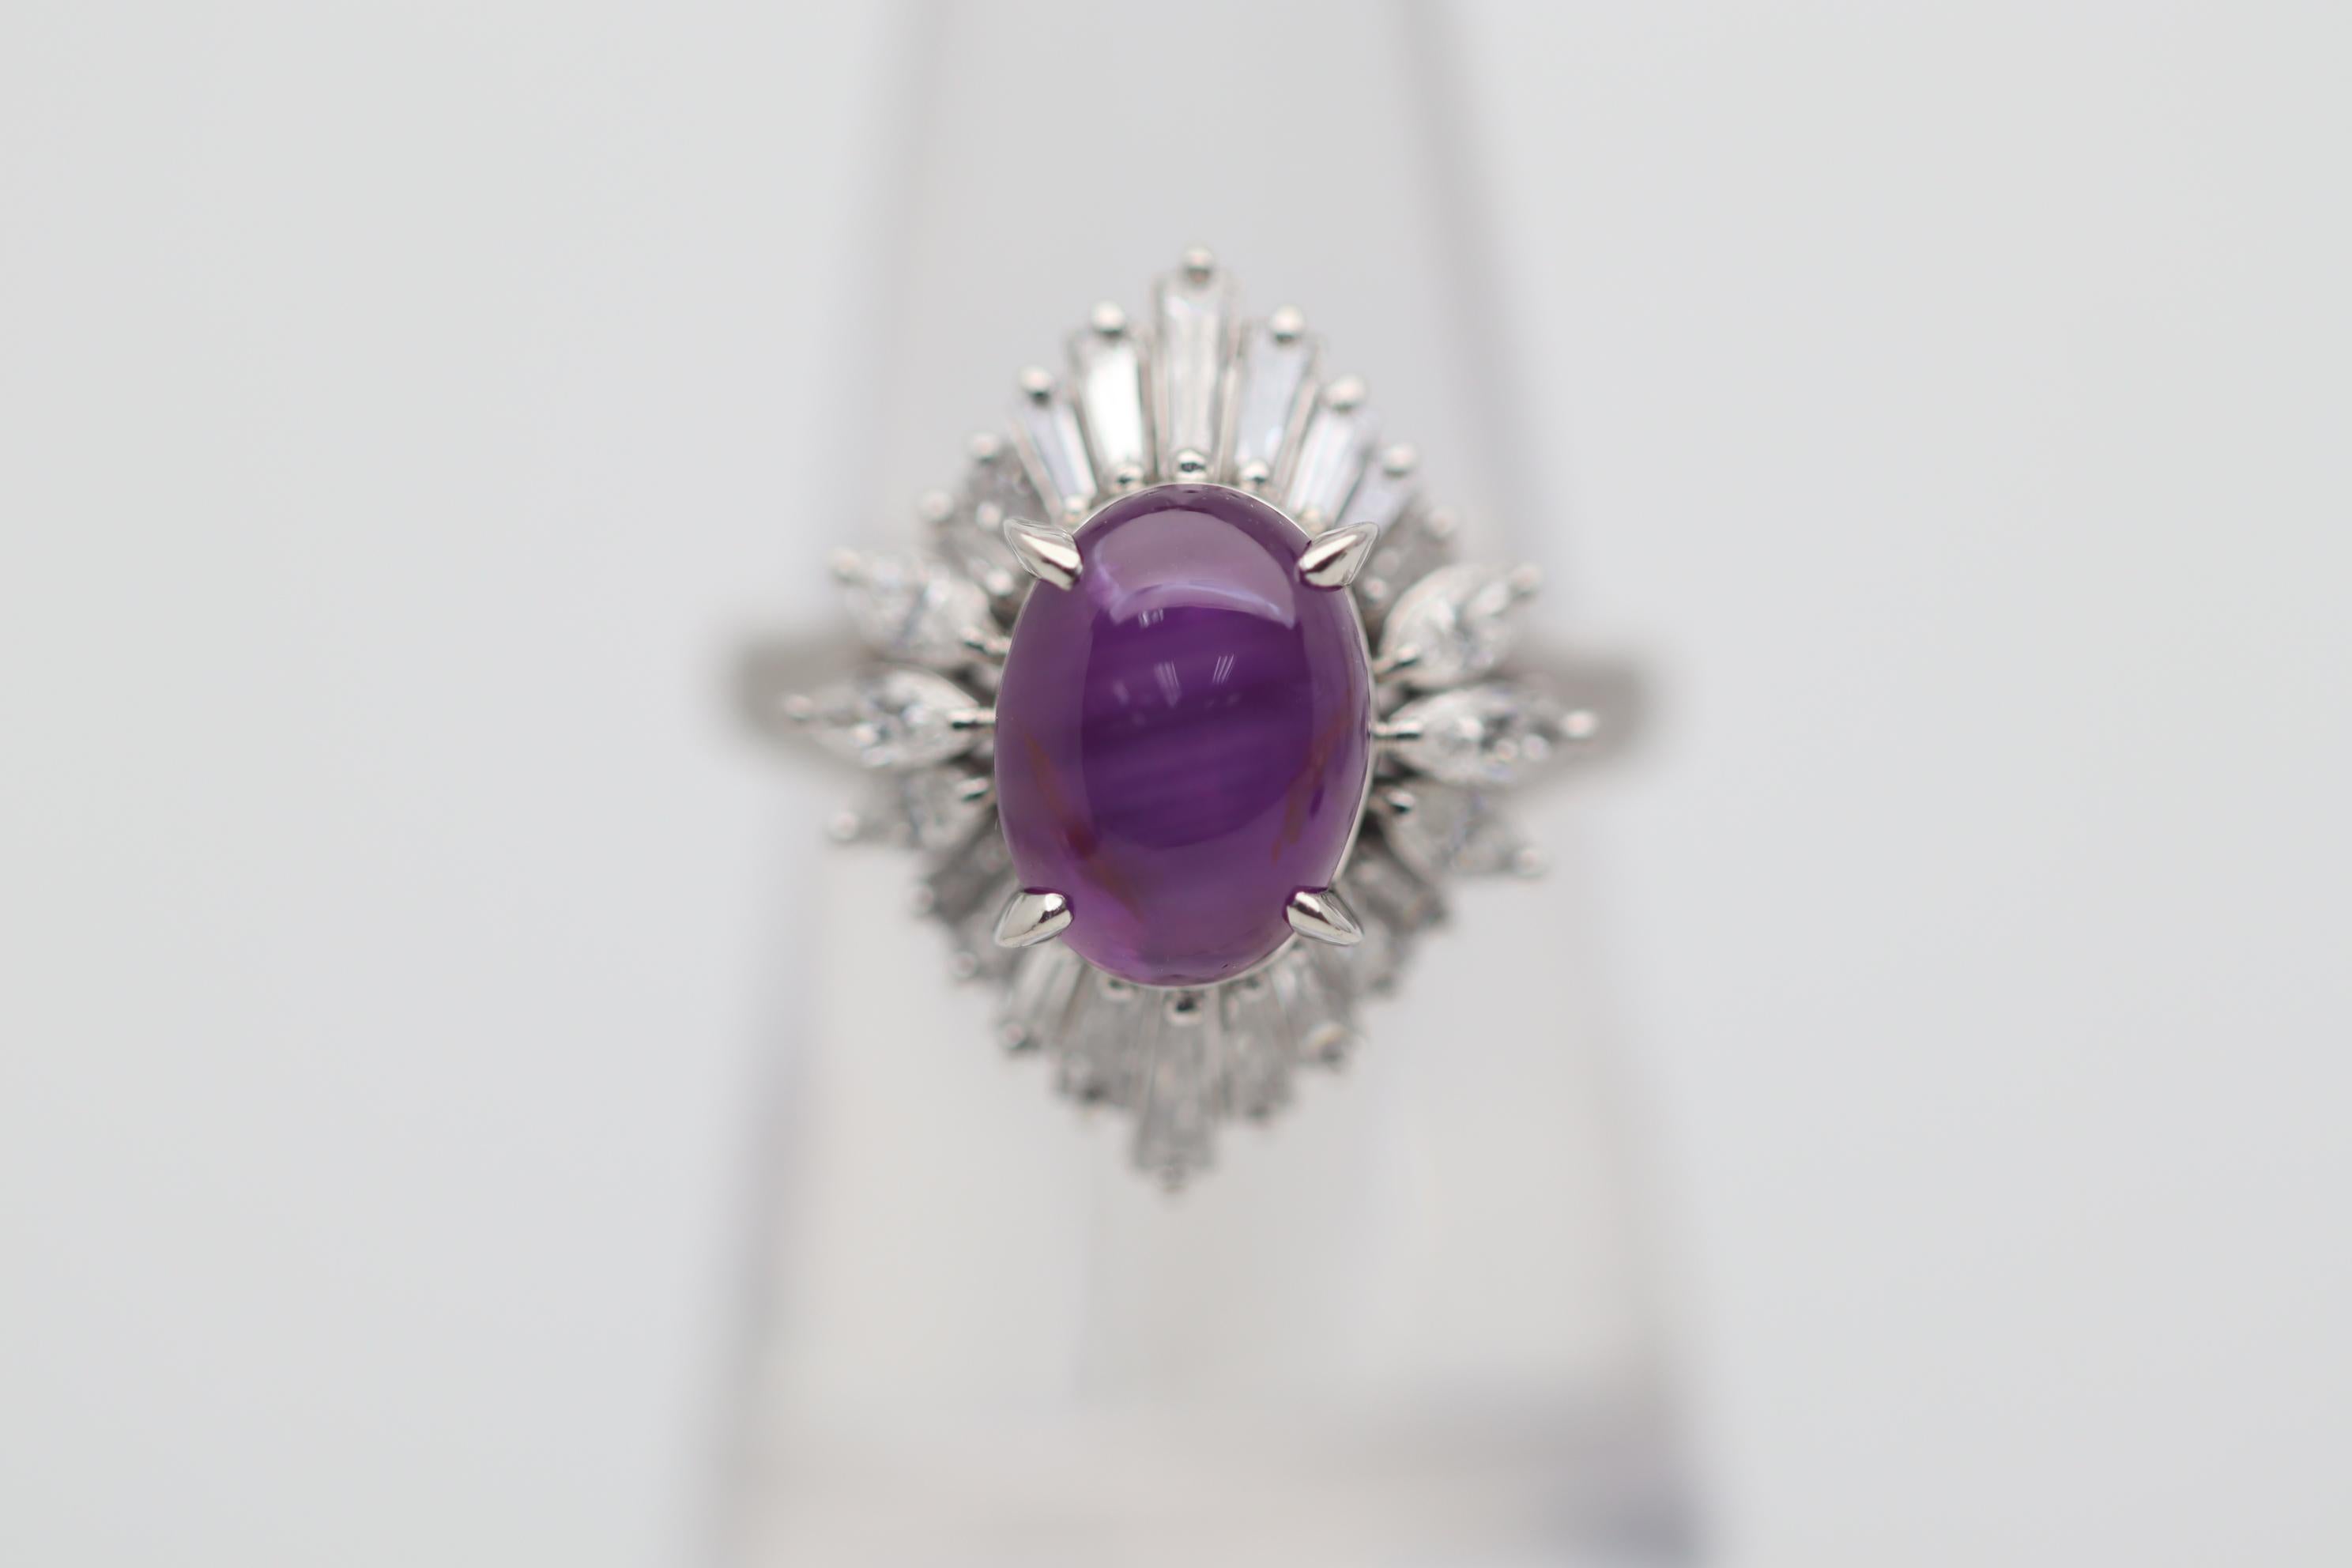 A lovely strongly colored star sapphire takes center stage! It weighs 4.70 carats while having a rich intense reddish-purple color. Adding to that the sapphire has a strong 6-rayed star with each ray being sharp and full. It is complemented by 1.15